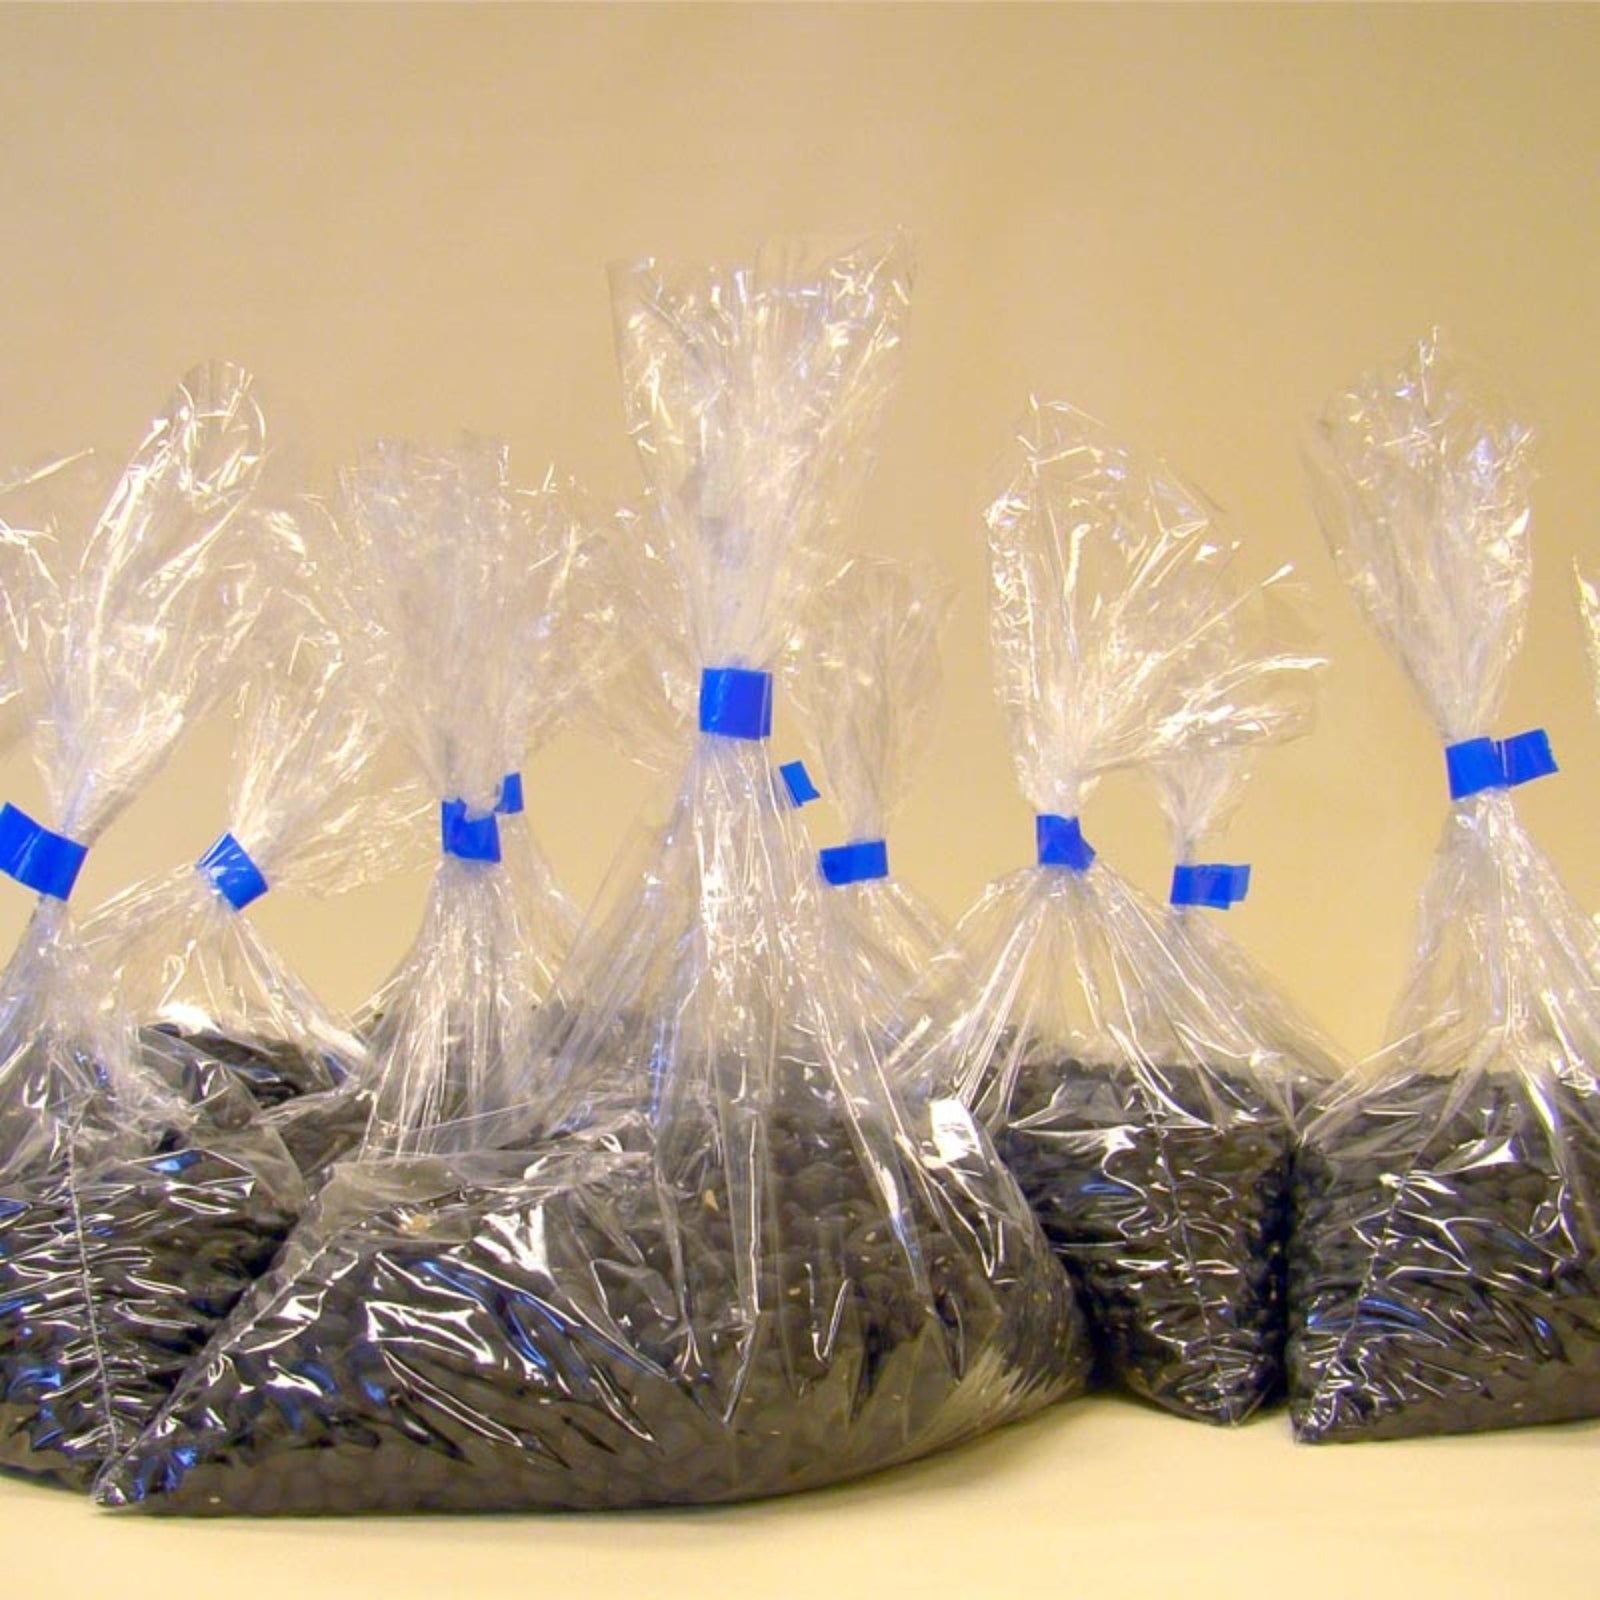 Several bags with dry beans inside closed with a blue self adhesive tape